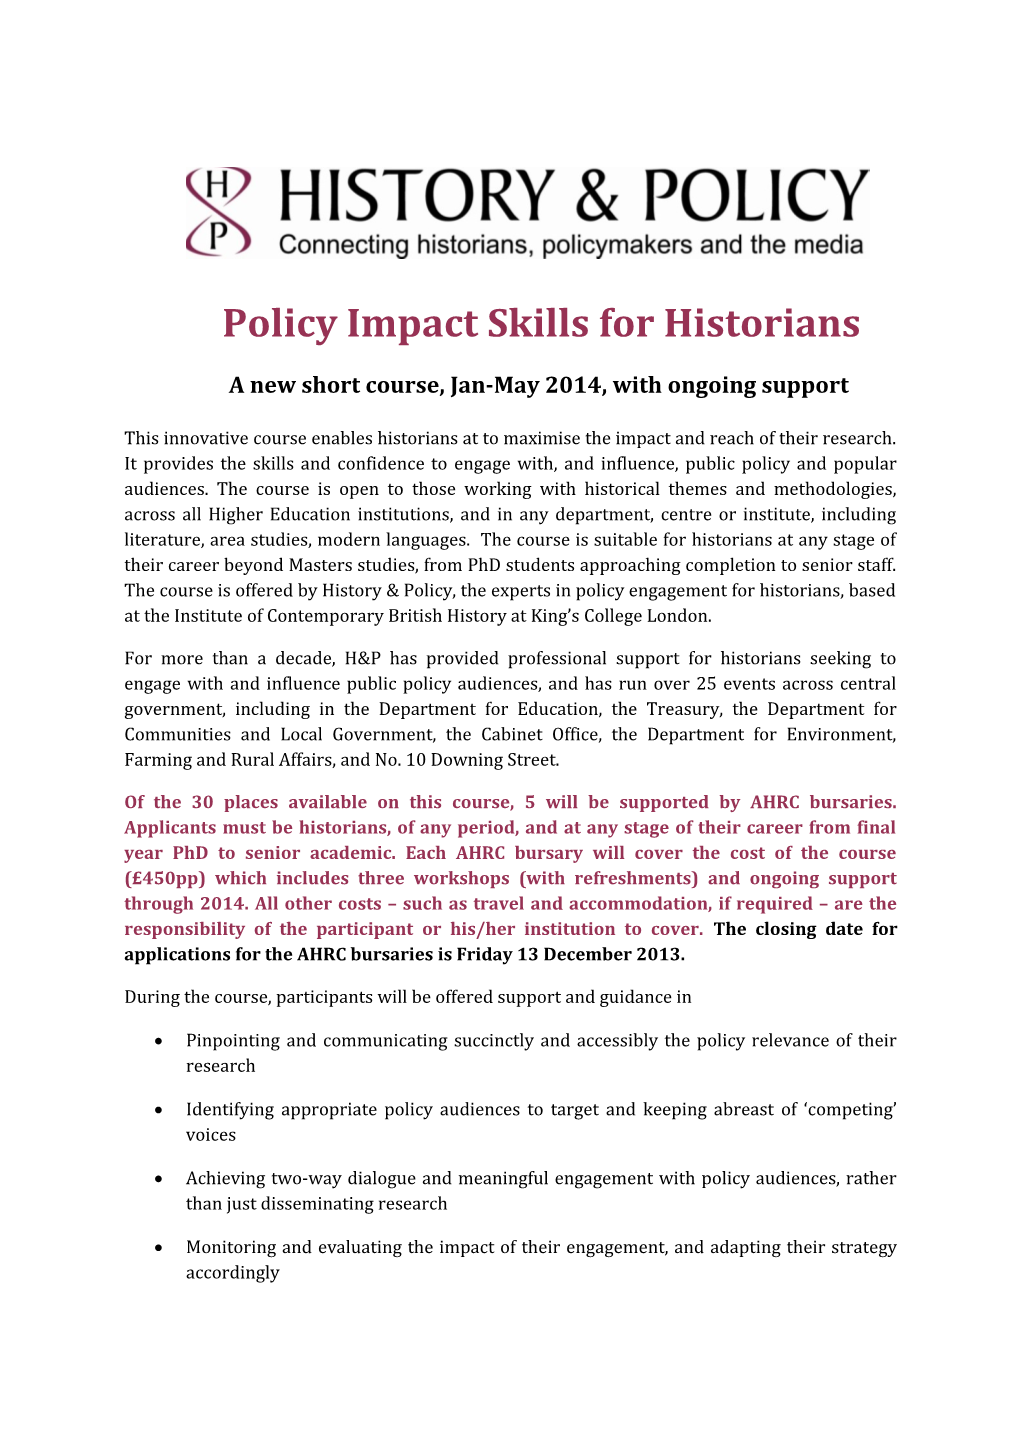 Policy Impact Skills for Historians